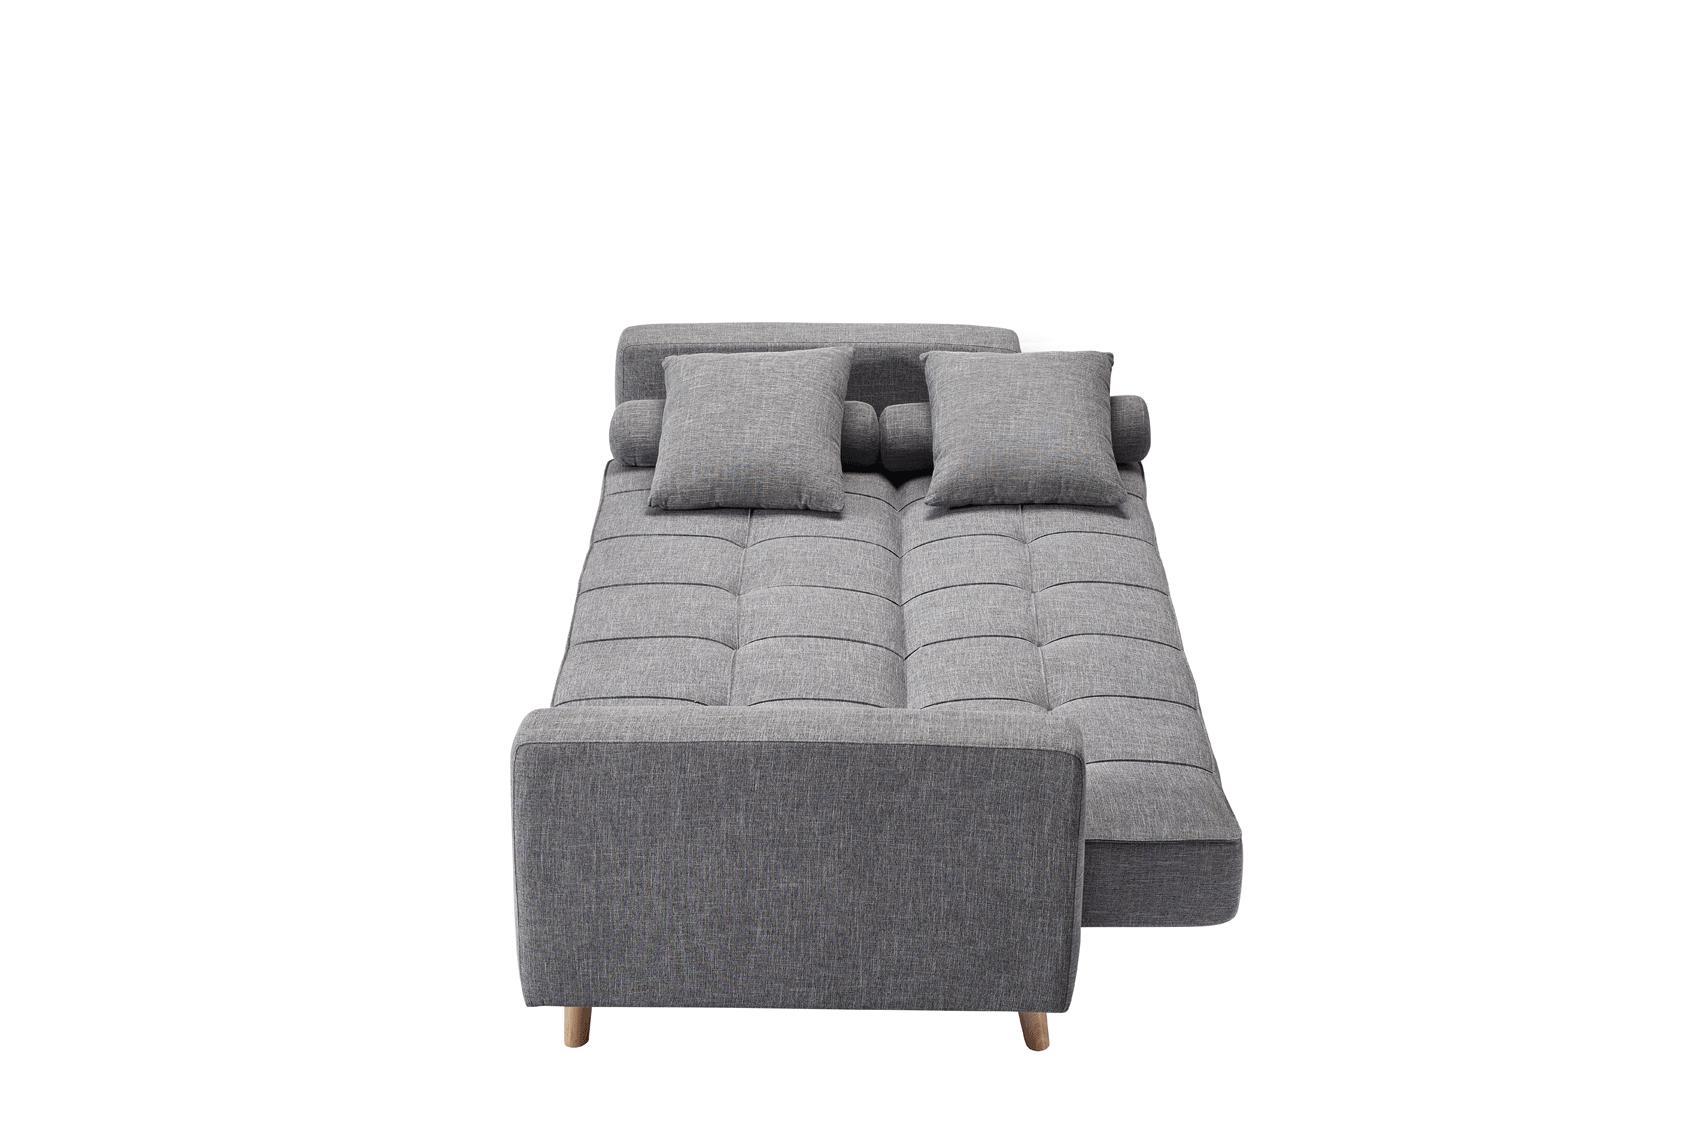 

    
ESF-116-Sofa Bed Contemporary Grey Fabric 3 Seat Sofa-bed Modern Chic ESF 116
